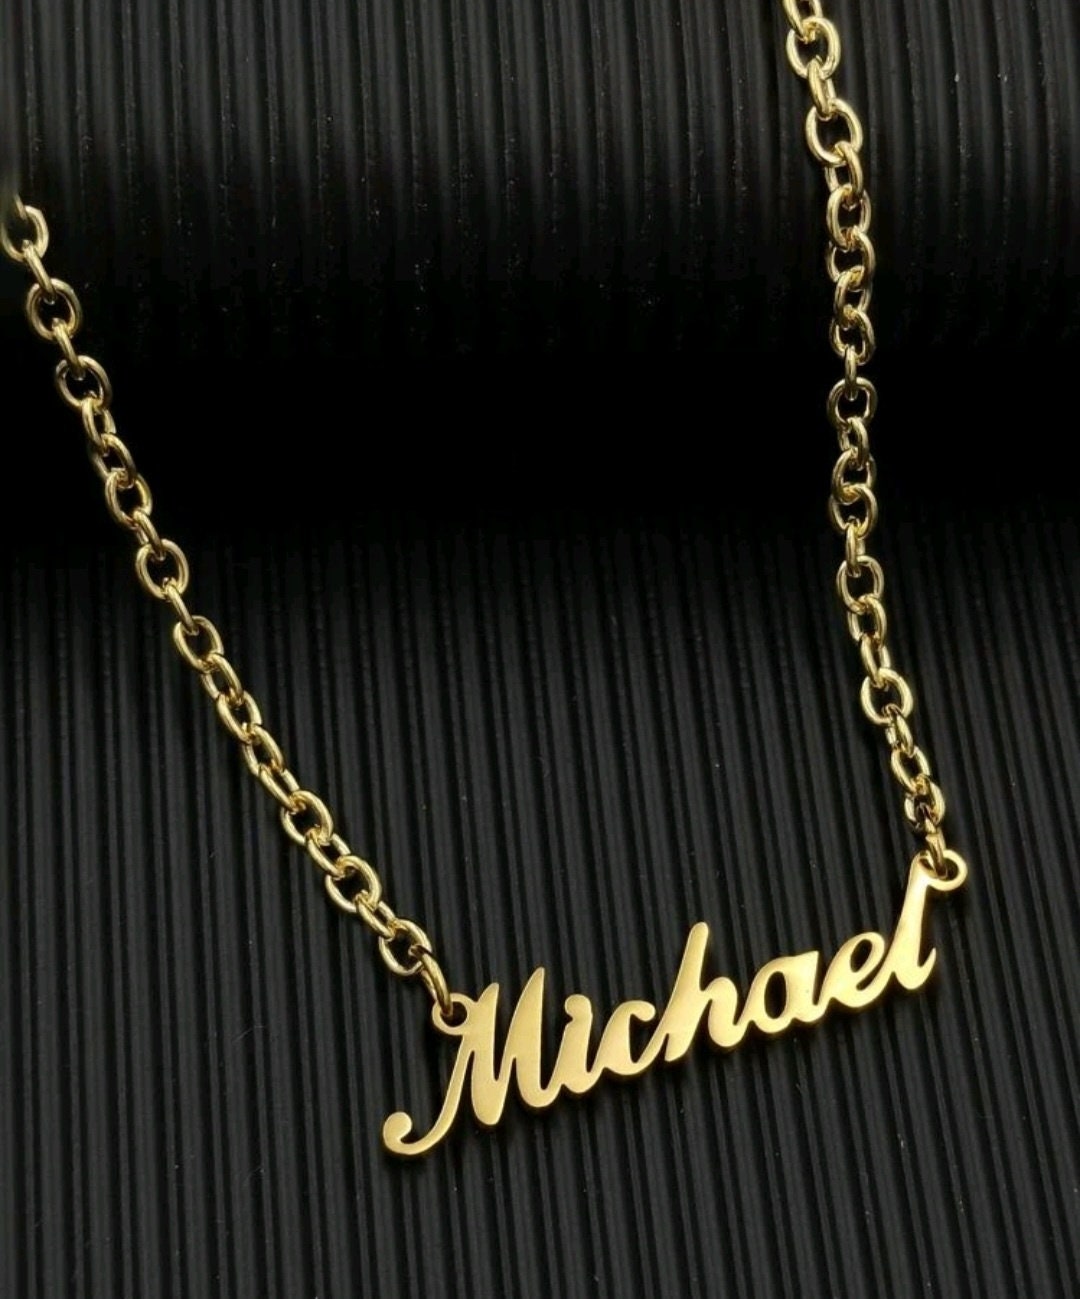 Dainty Name necklace Michael gold Stainless steel pendant necklace gift for her